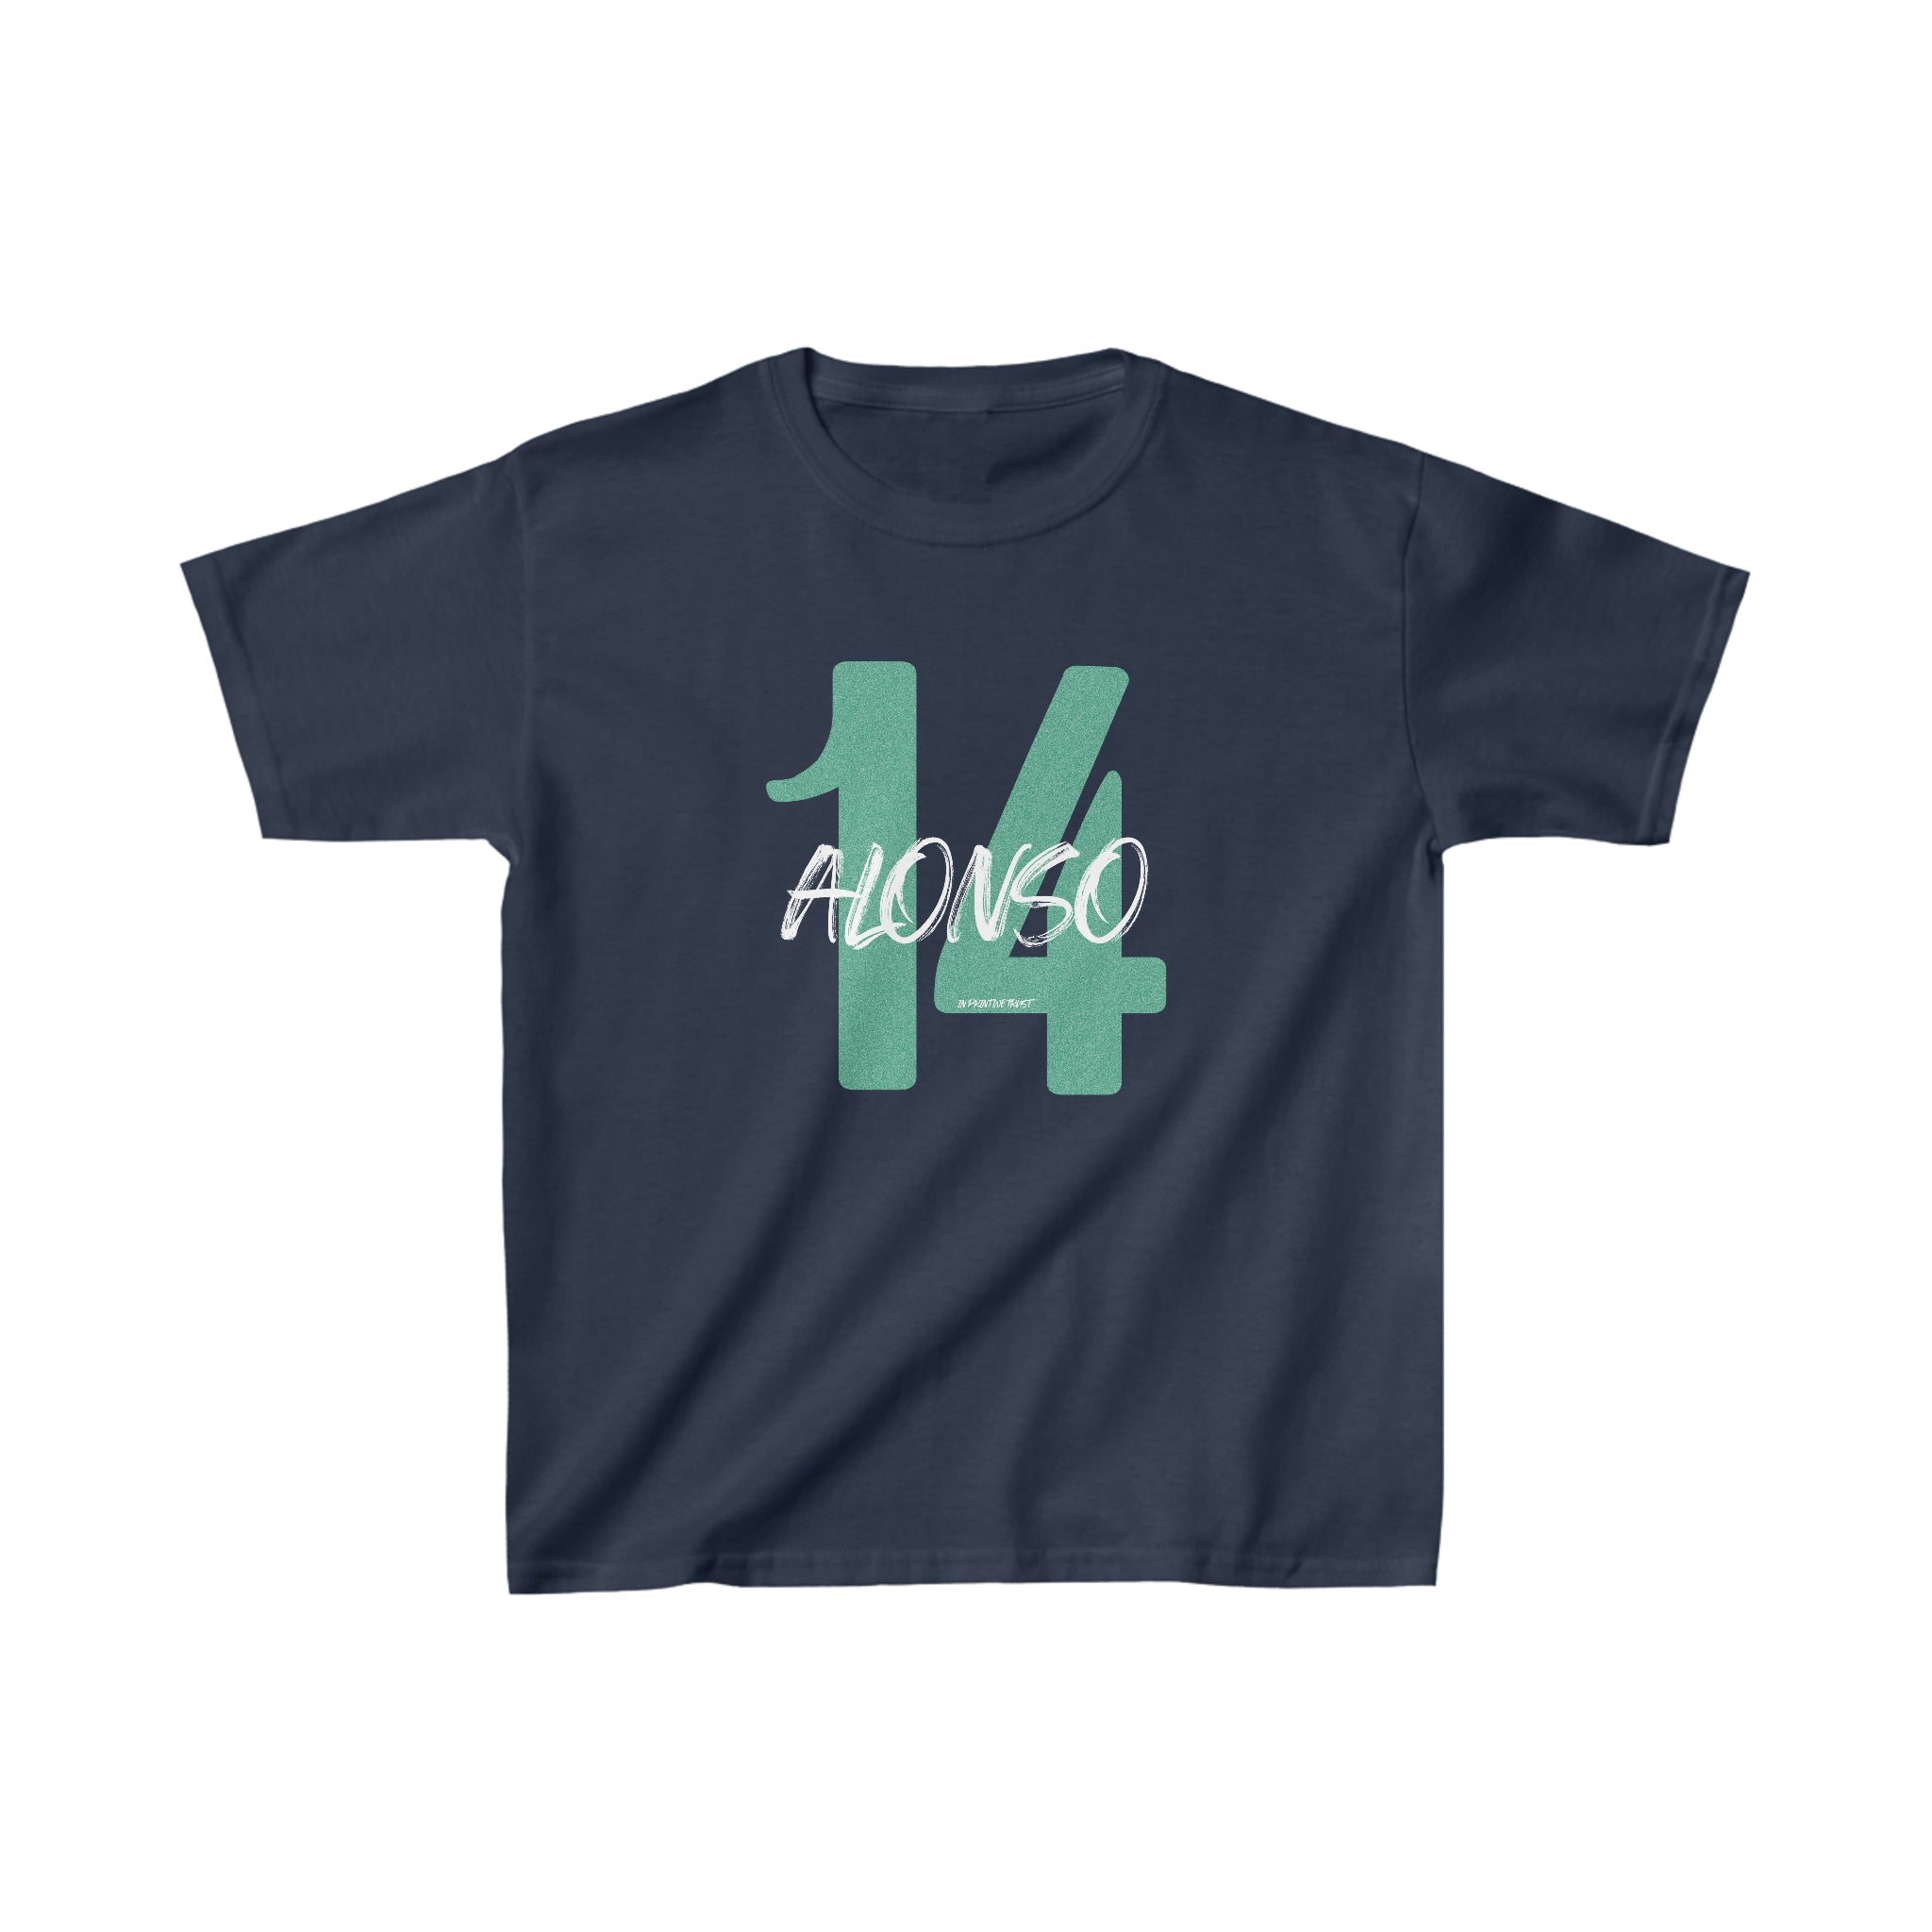 'Alonso 14' baby tee - In Print We Trust